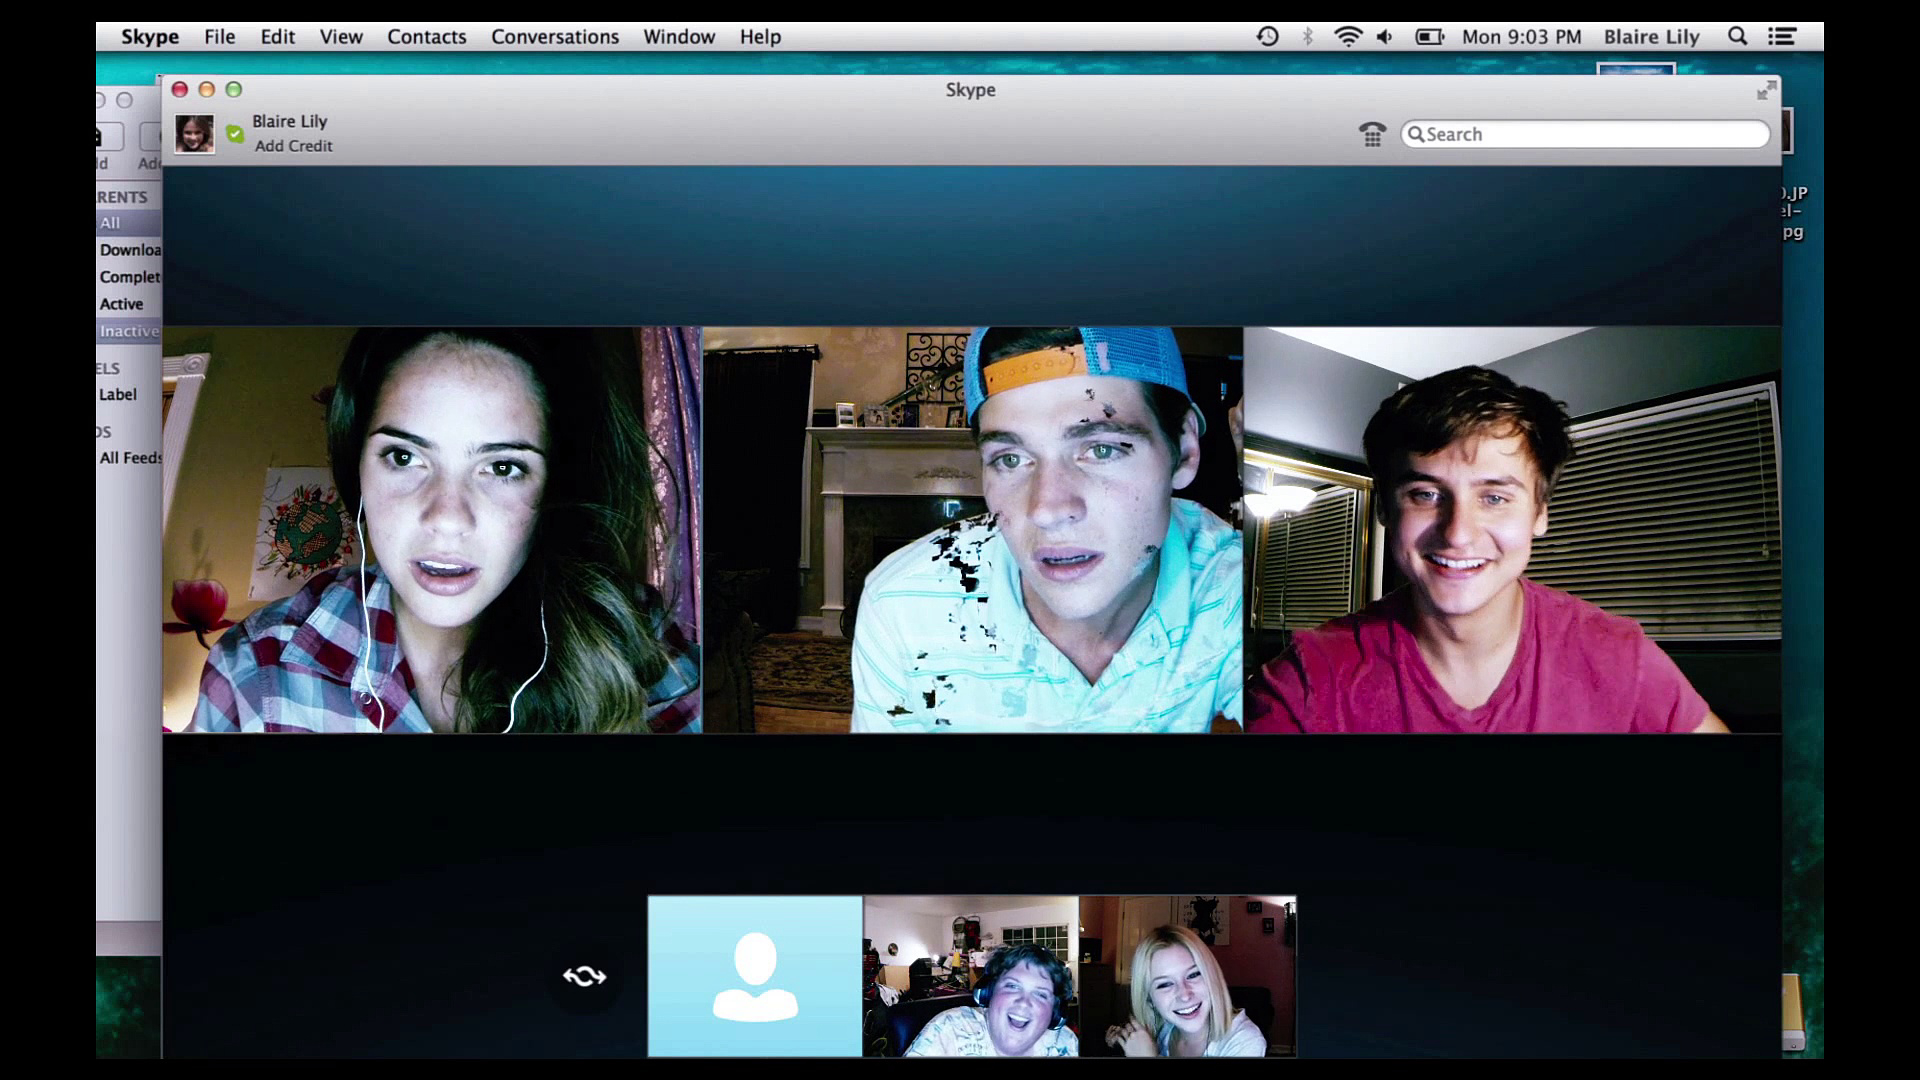 Poster Phim Hủy Kết Bạn (Unfriended)